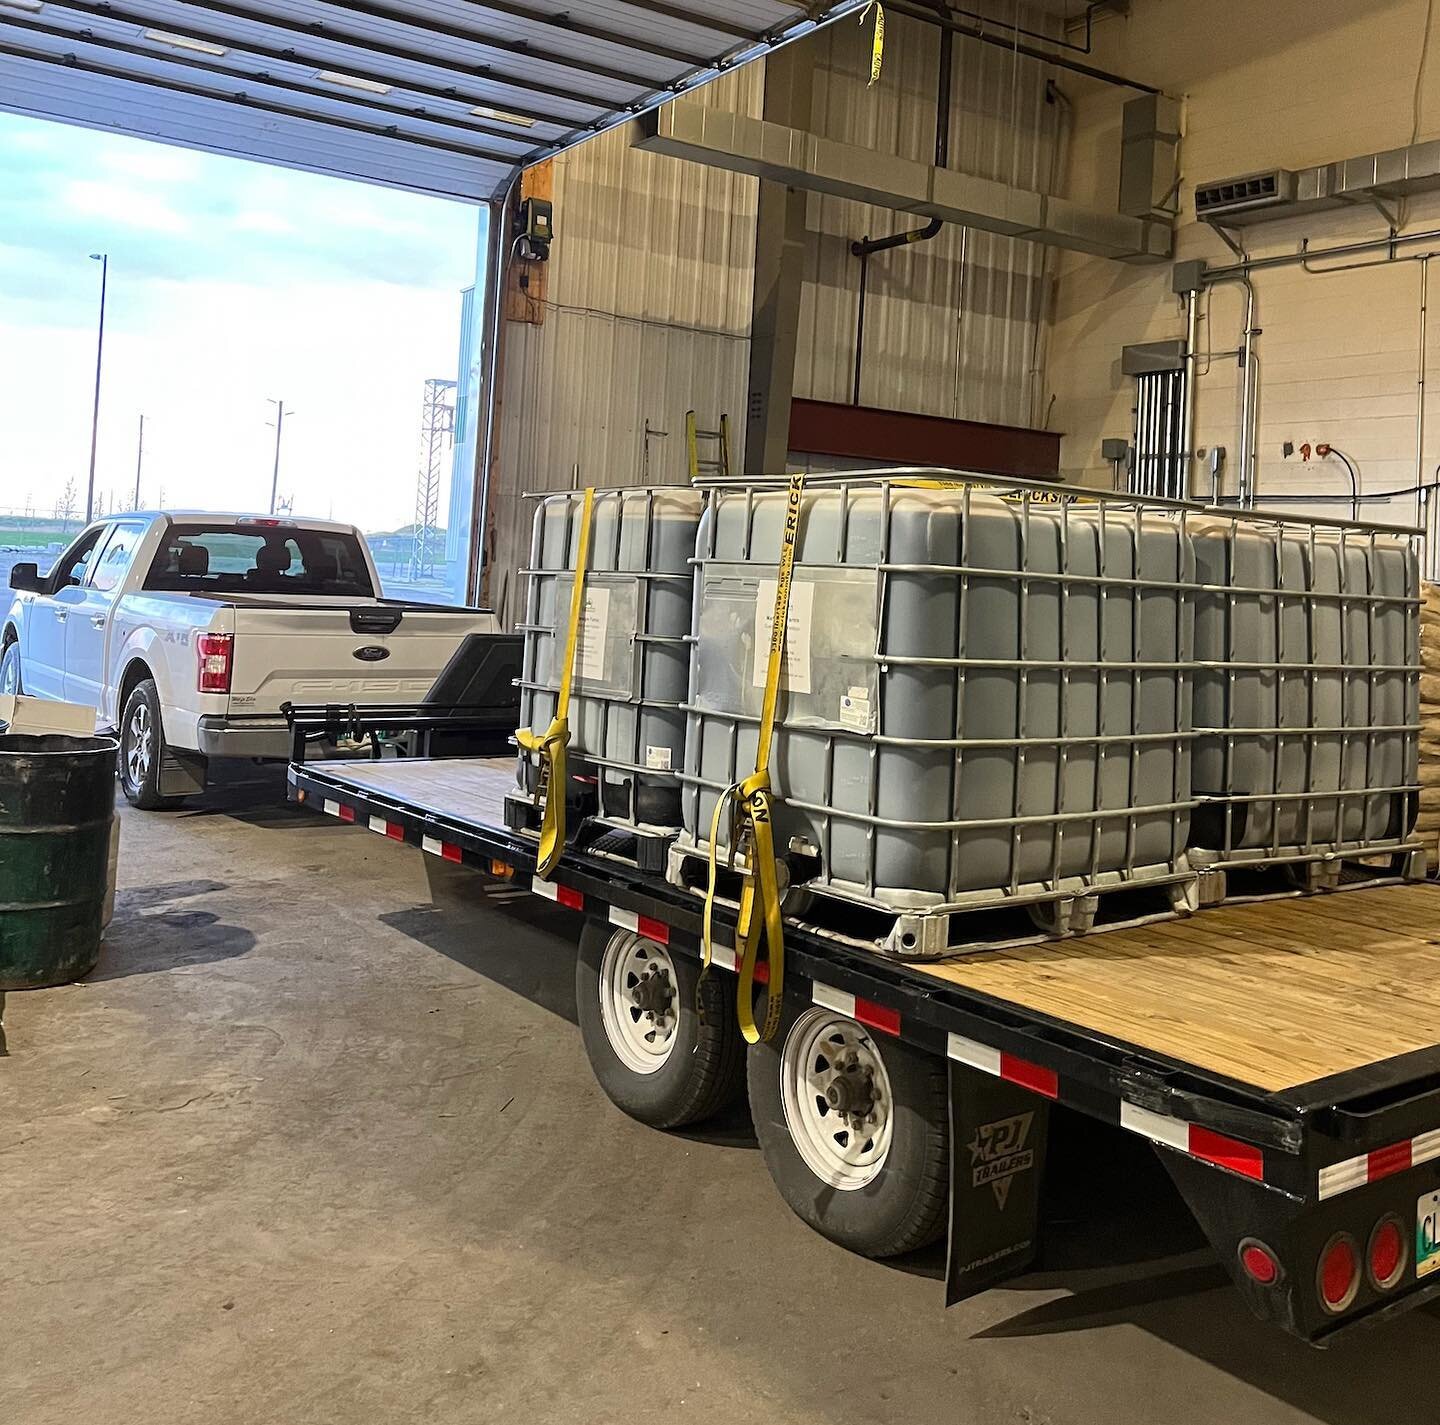 Time to blast the radio and get an early morning delivery done! 🔊🚛

This truck is loaded up with an iQ Phos/Release HA blend. It's going to be a busy May long weekend in fields around our area and we're glad our products will be going to work with 